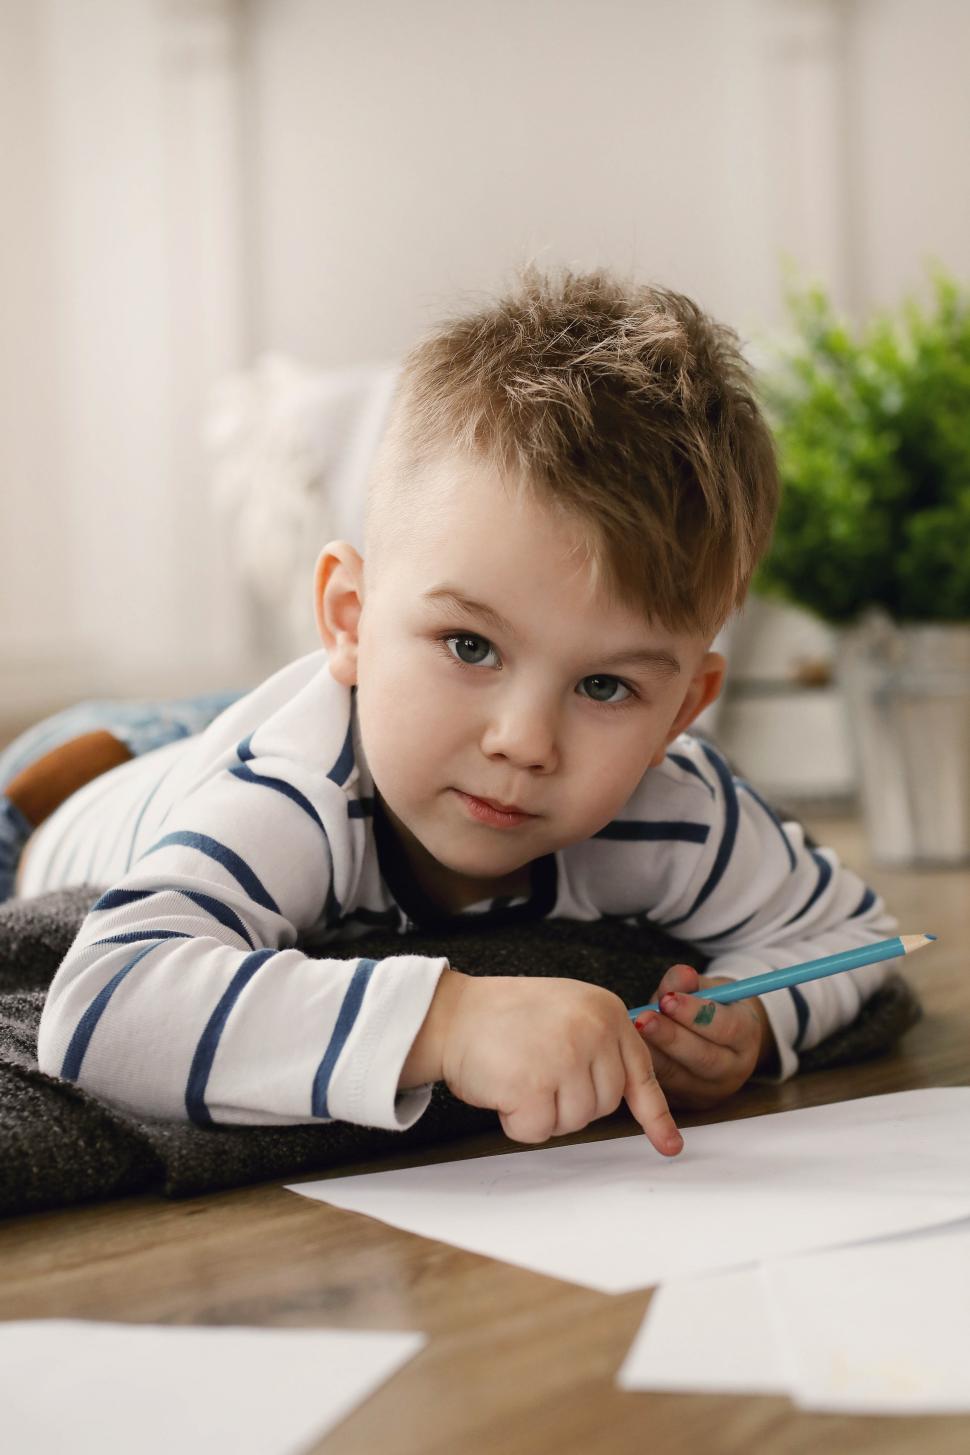 Free Image of Toddler at home drawing 